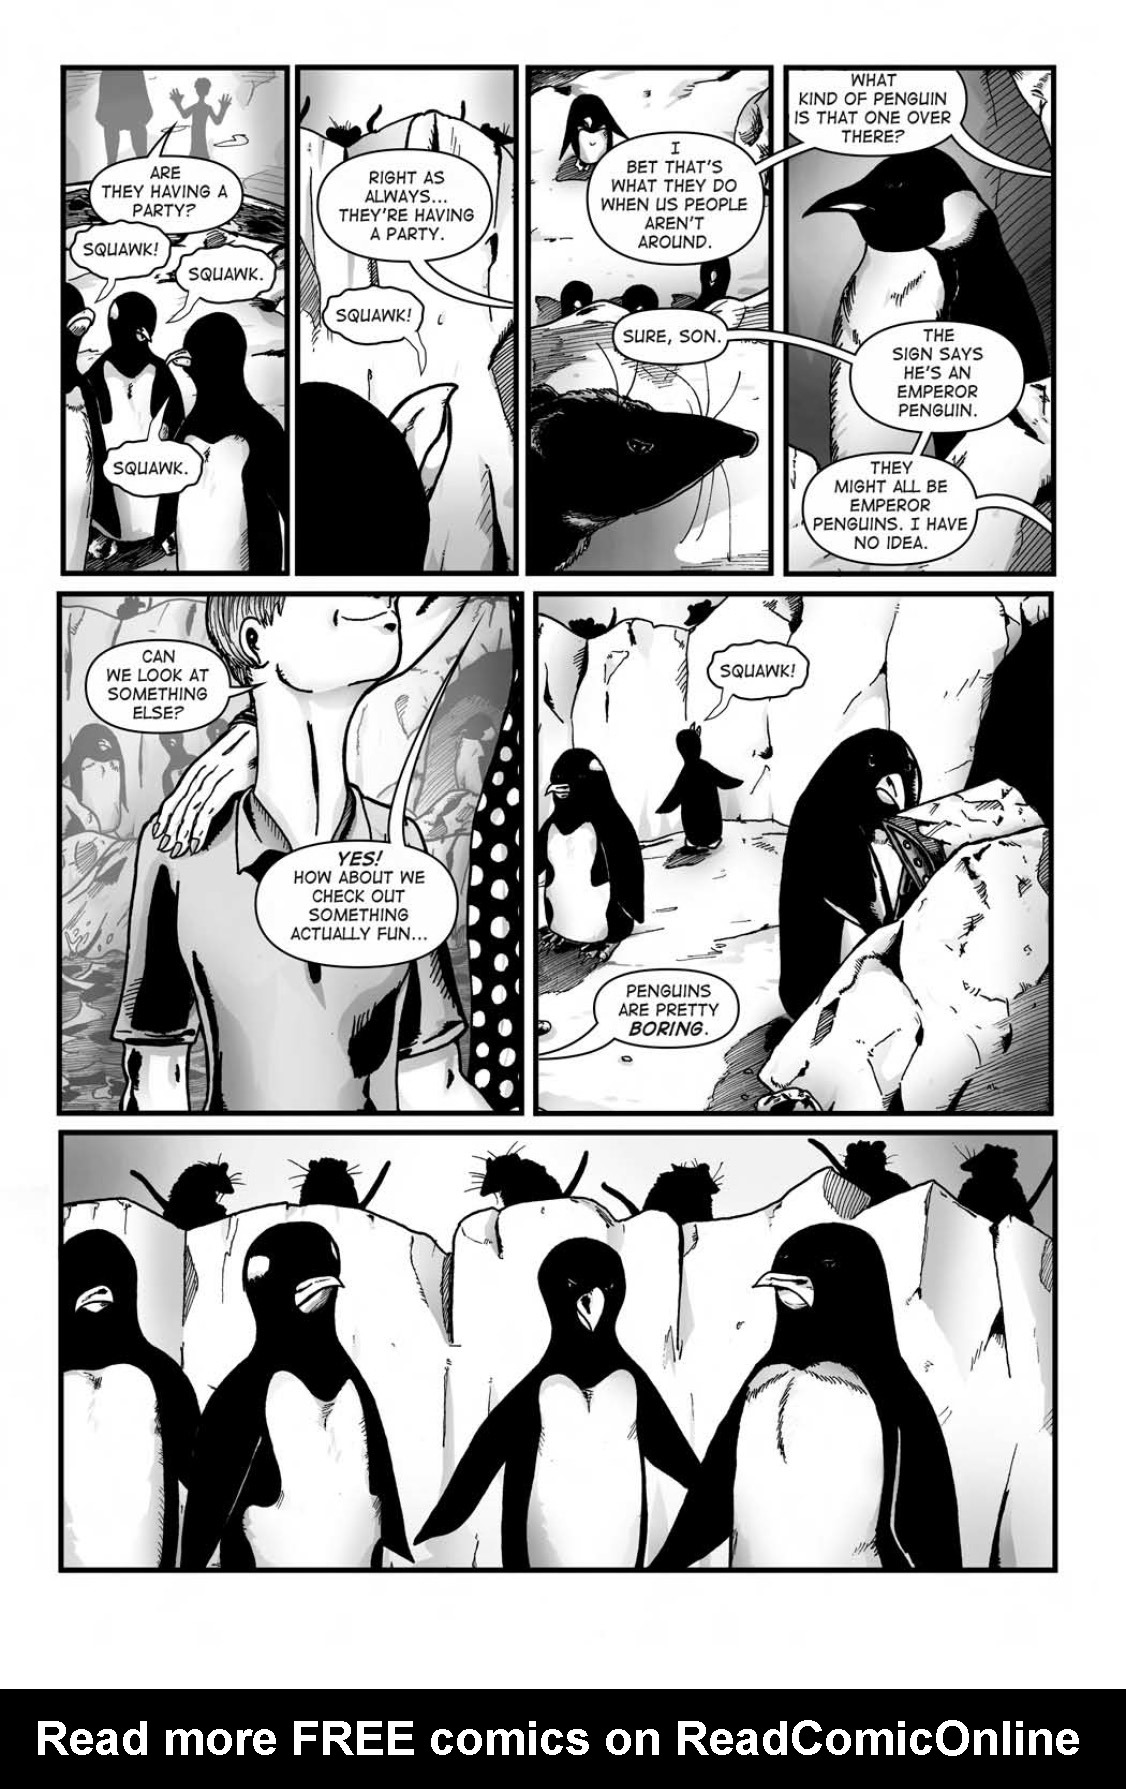 Read online Free Comic Book Day 2014 comic -  Issue # Penguins vs. Possums 001 - FCBD Edition - 5